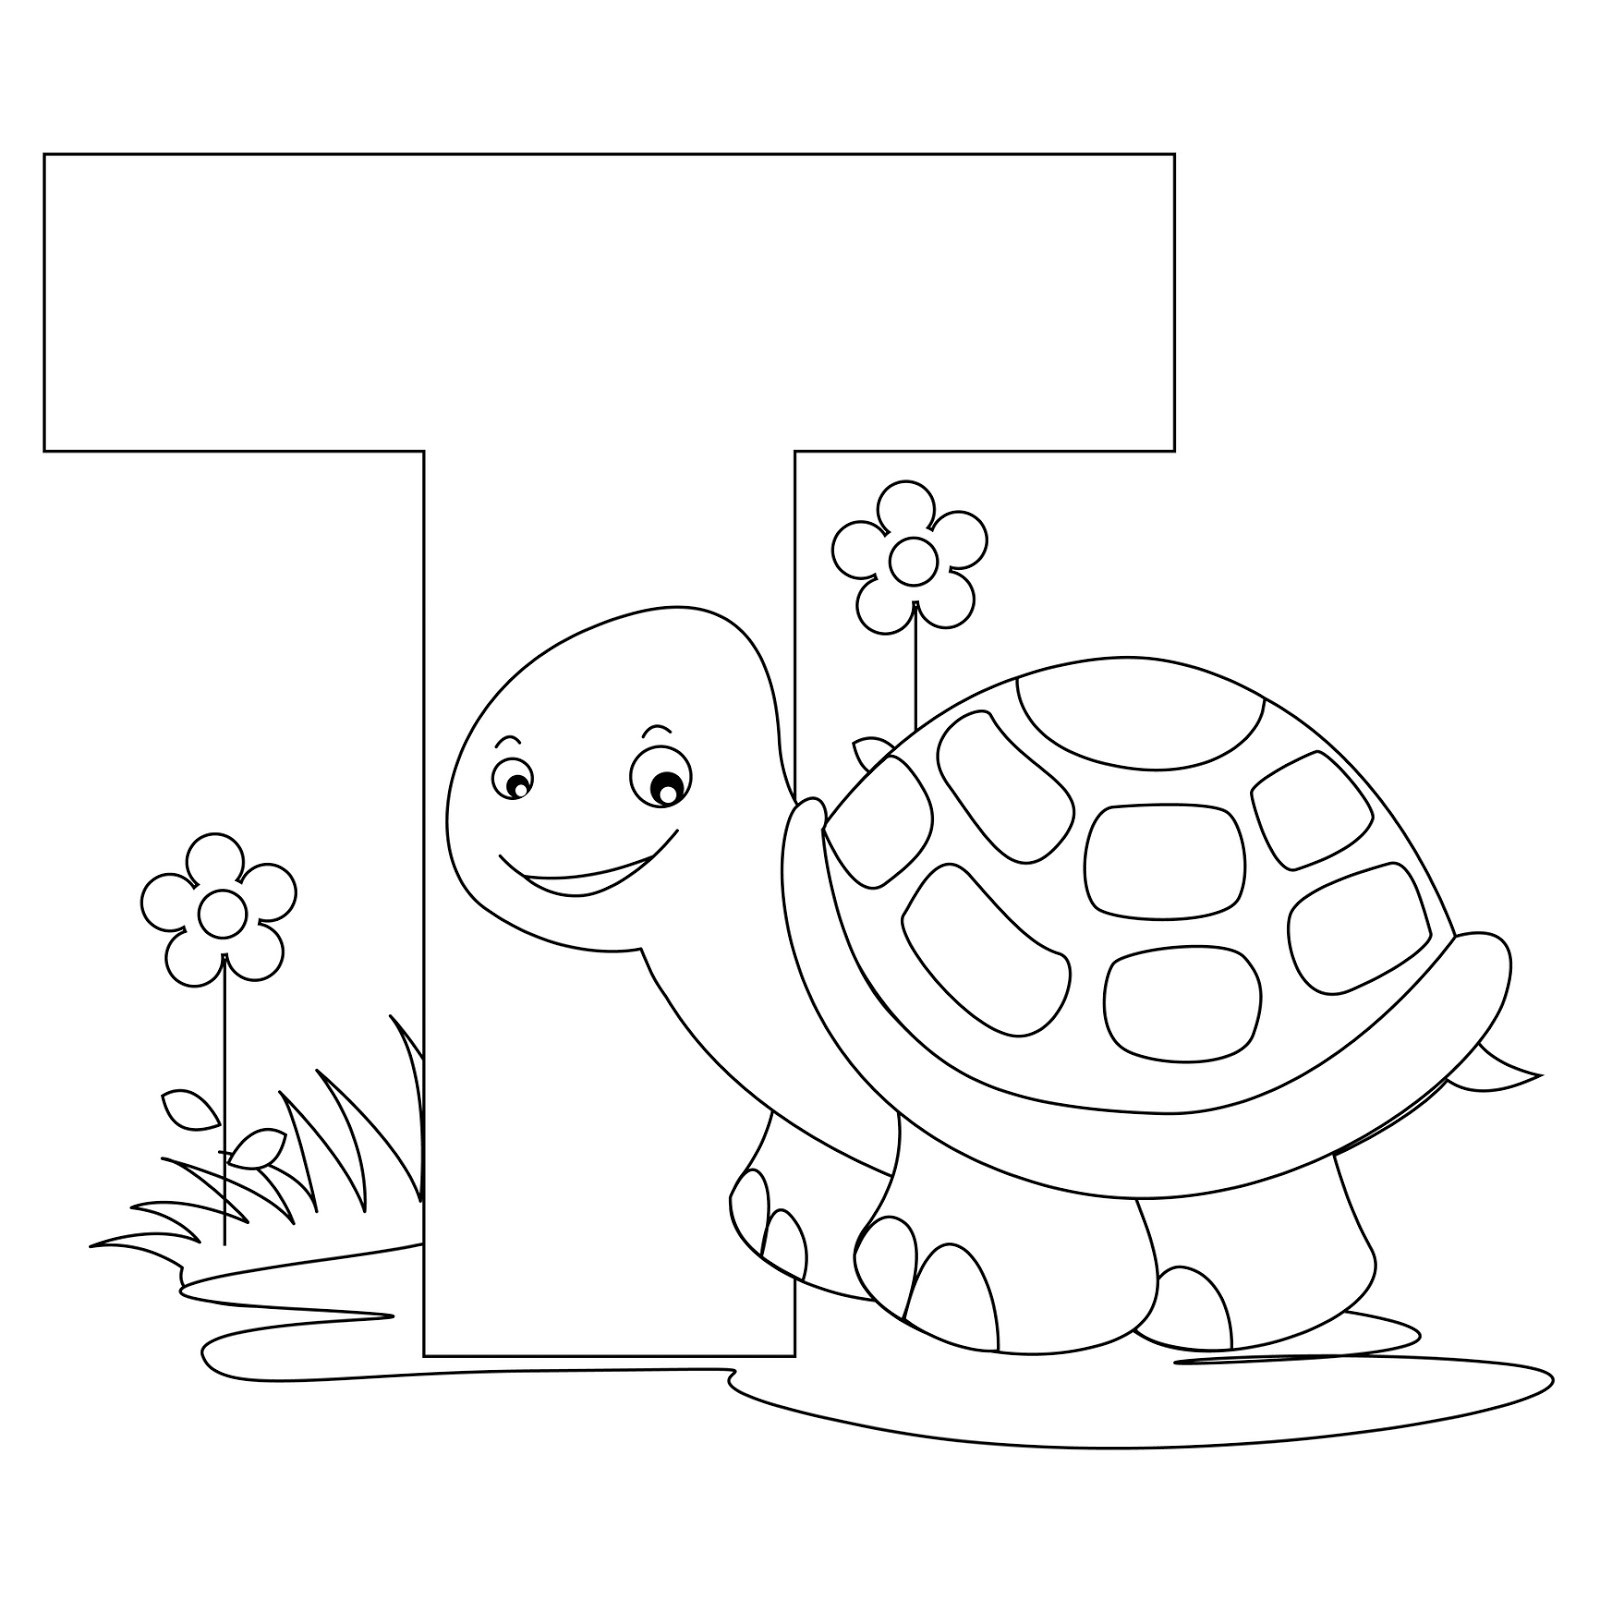 Abc Coloring Pages For Toddlers
 Animal Alphabet Letter T coloring Turtle coloring